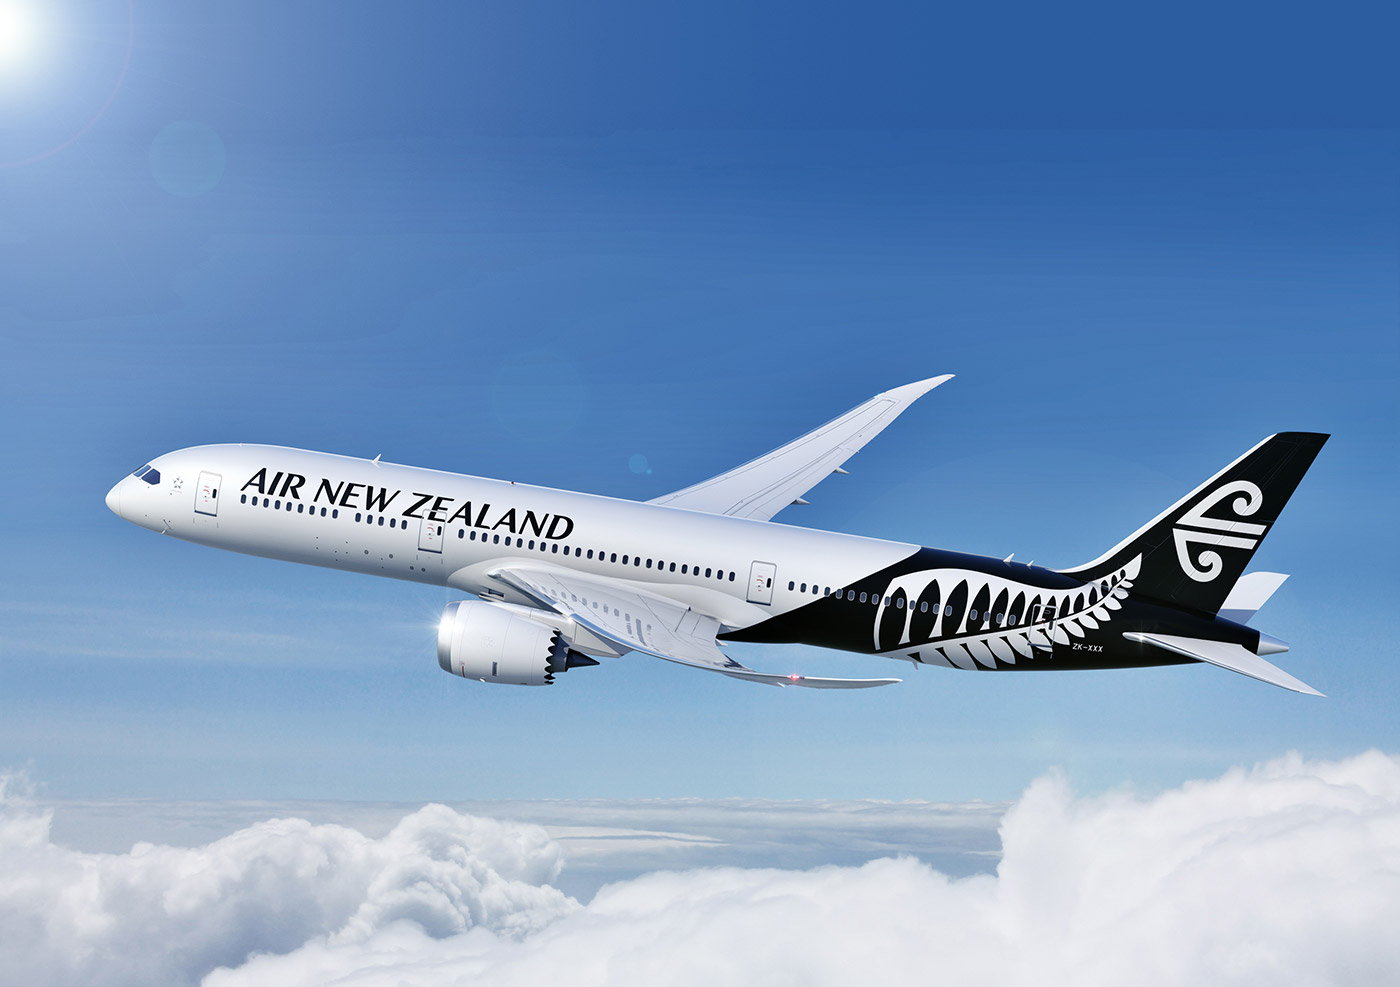 Air New Zealand White Livery | Courtesy of www.airlinereporter.com